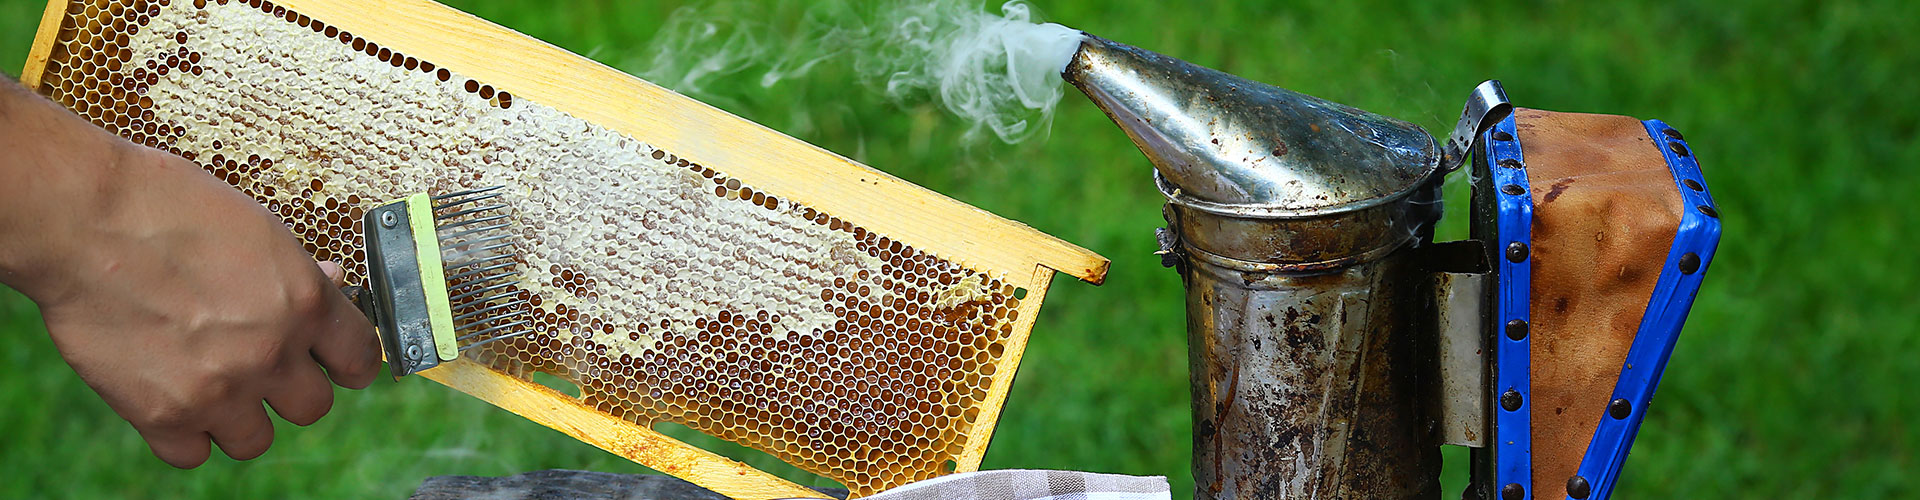 Scripps Ranch Bee Removal, Bee Hive Removal and Honey Bee Removal